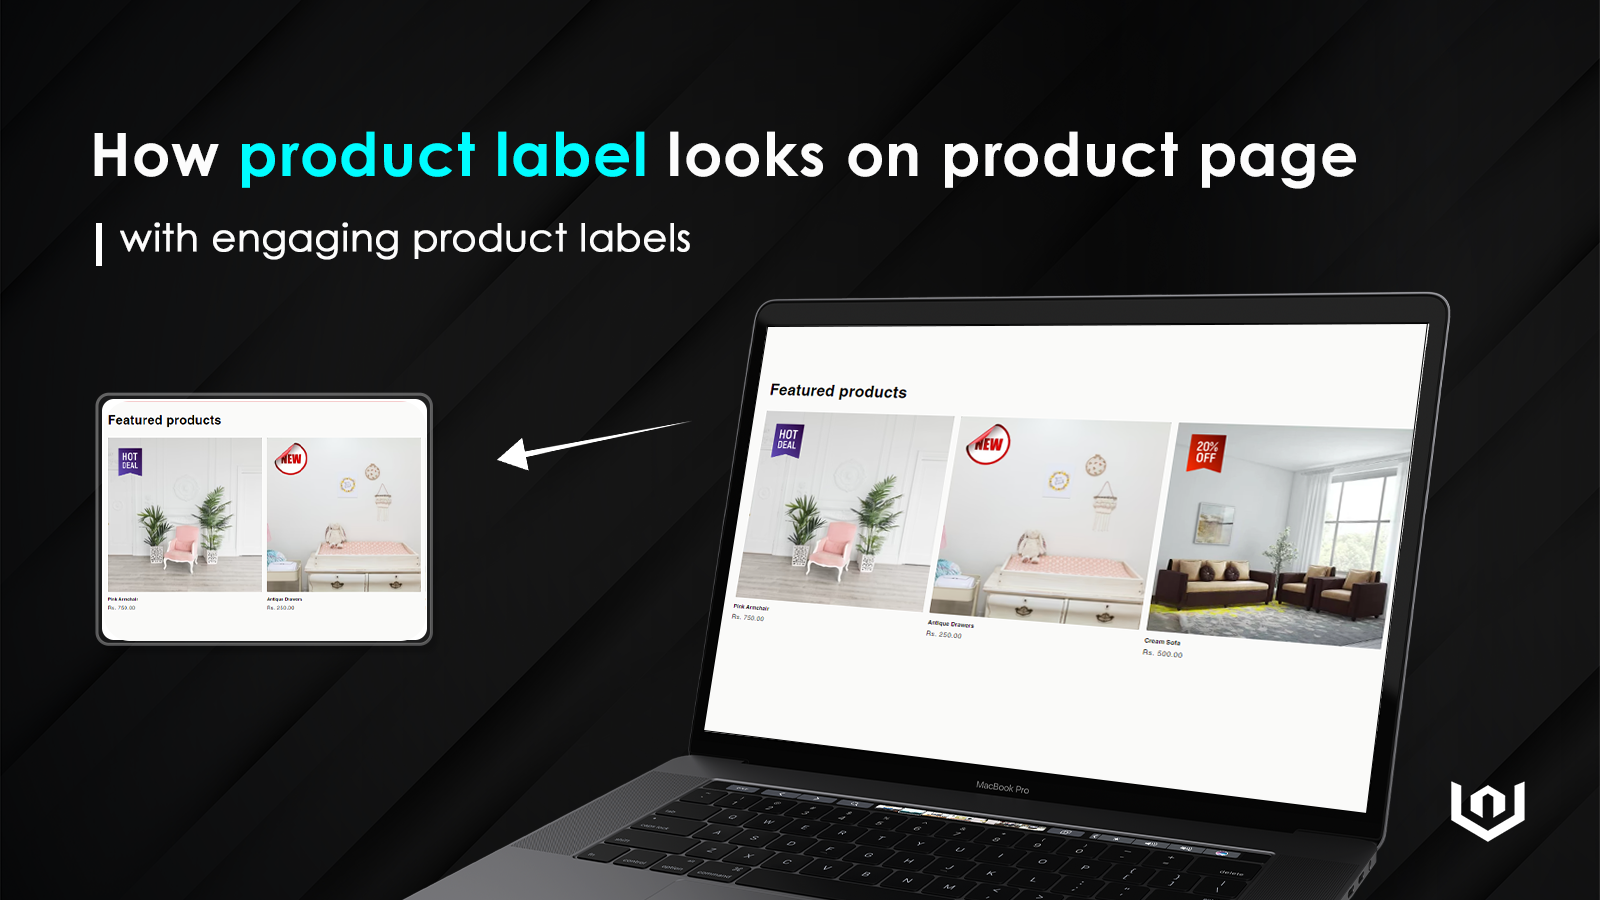 How product label looks on product page